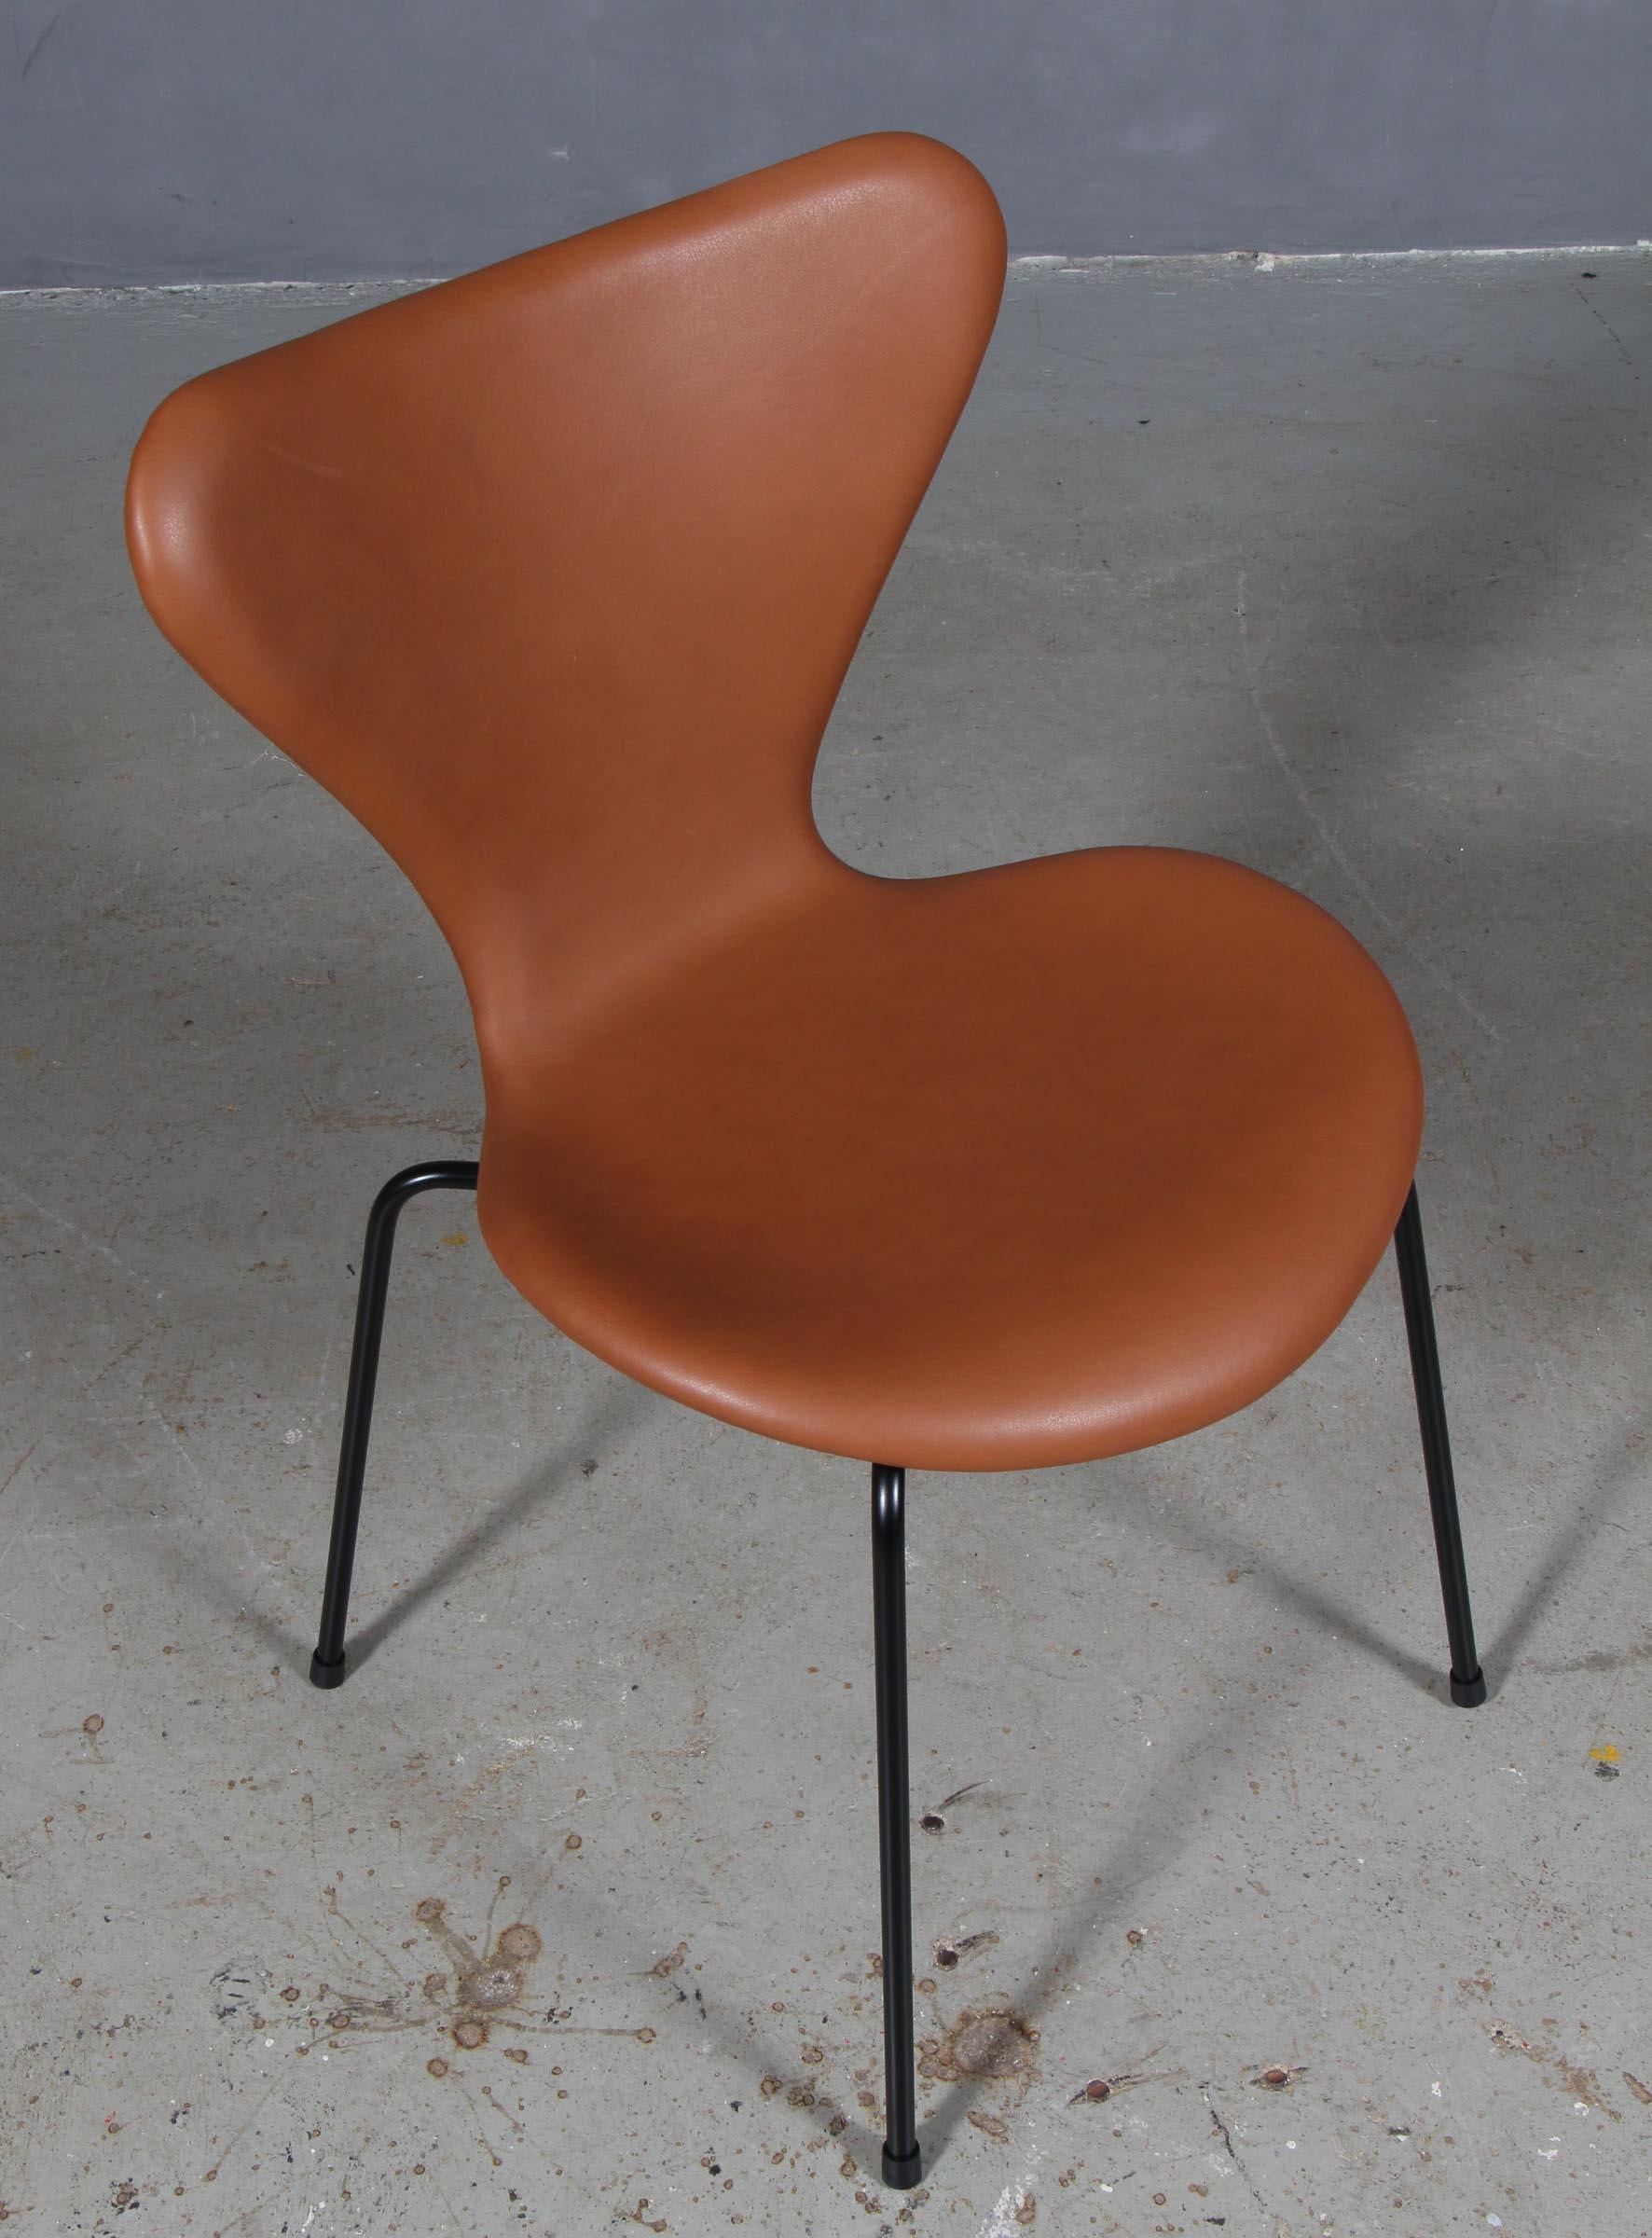 Arne Jacobsen dining chair new upholstered with cognac pure aniline leather.

Base of powder coated steel tube.

Model 3107 Syveren, made by Fritz Hansen.